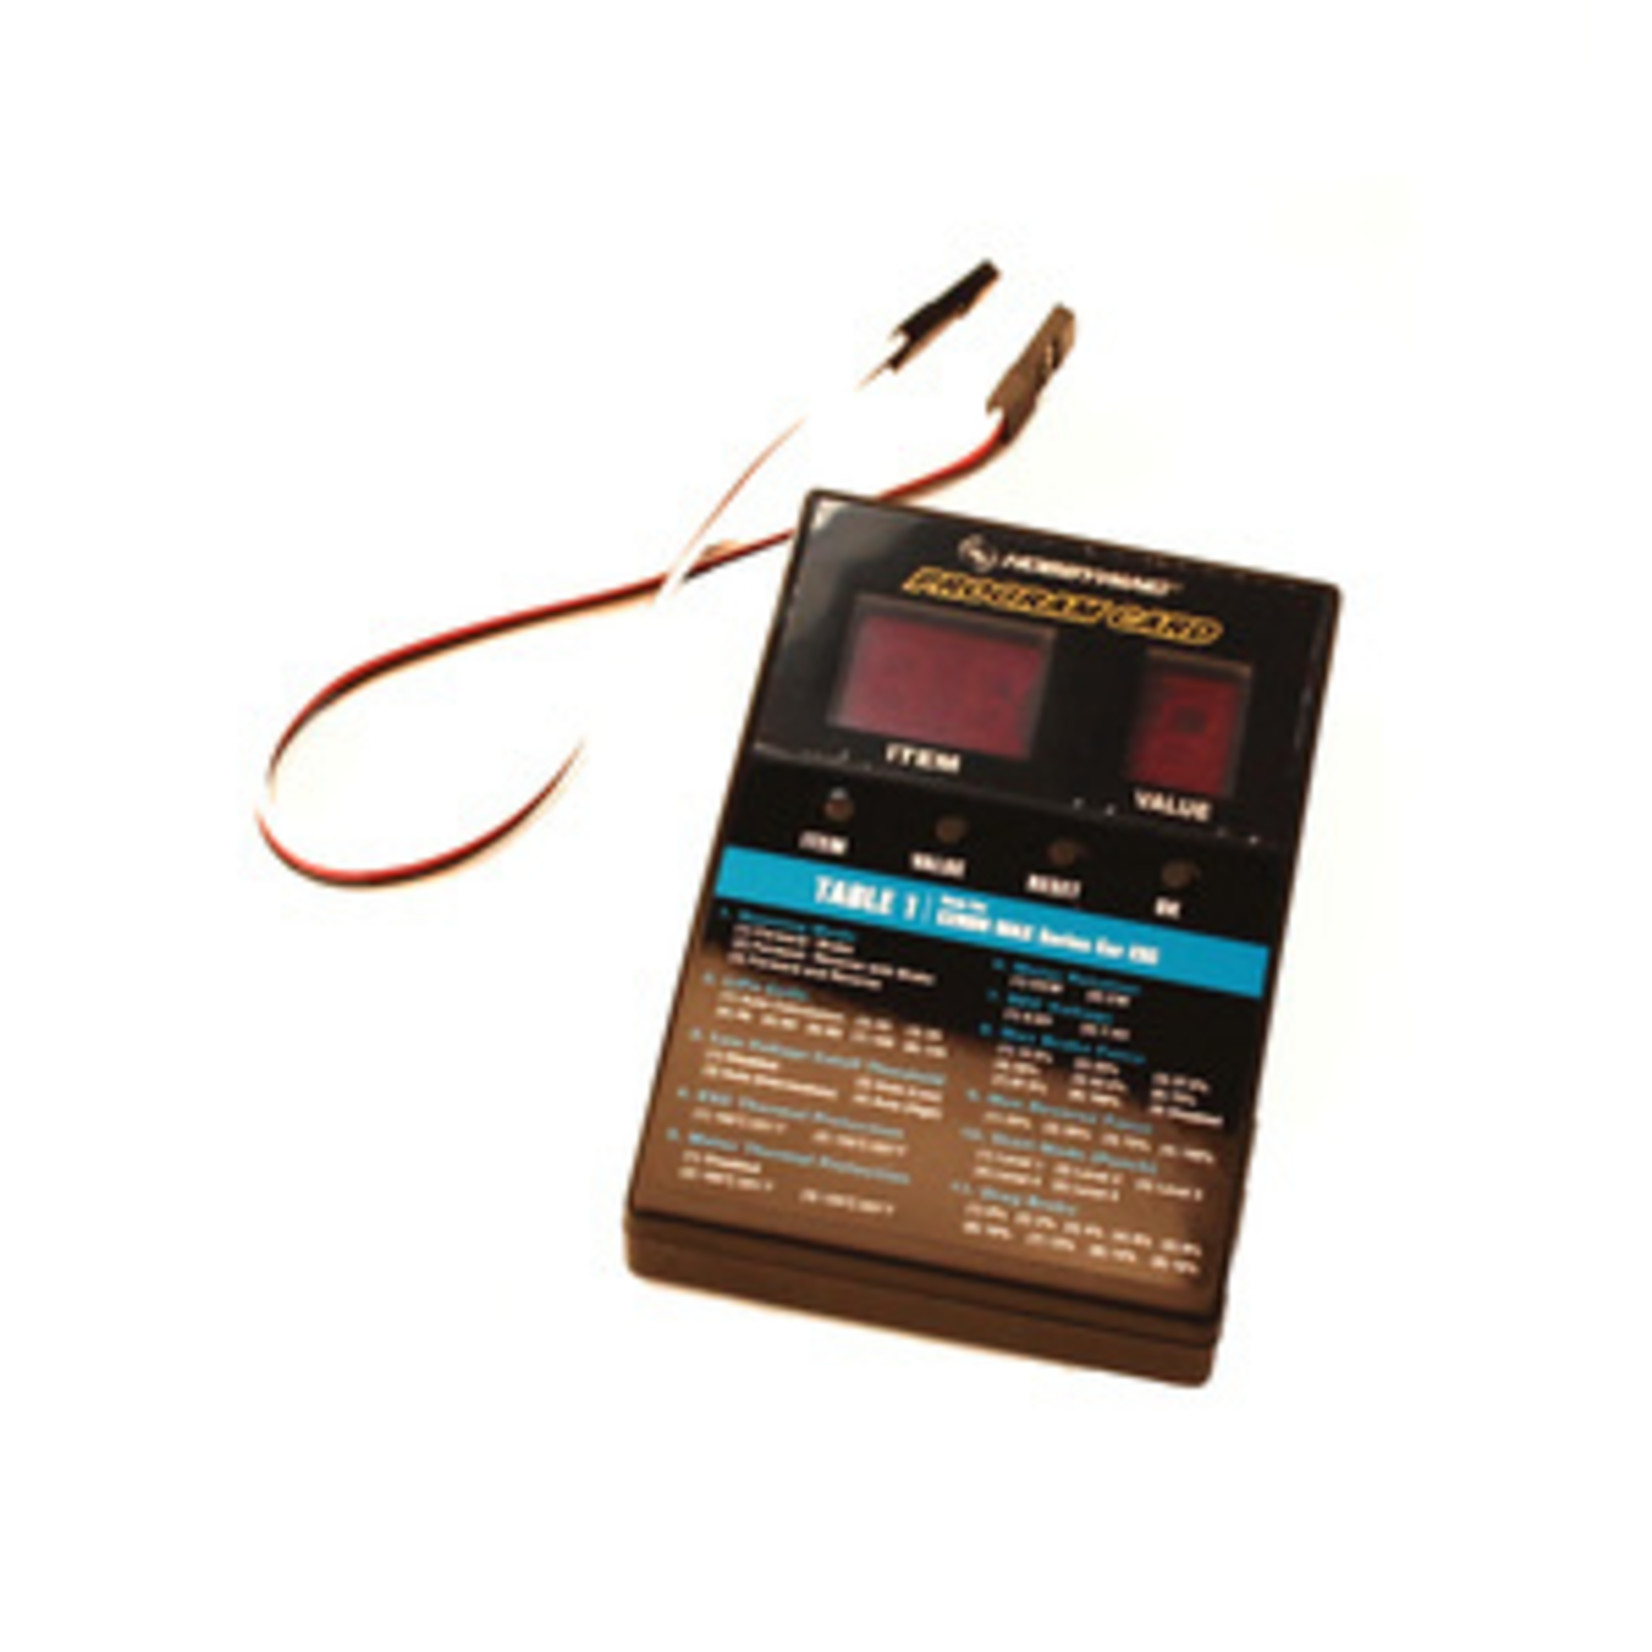 Hobbywing HWI30501003 LED Program Card - General Use for Cars, Boats, and Air Use